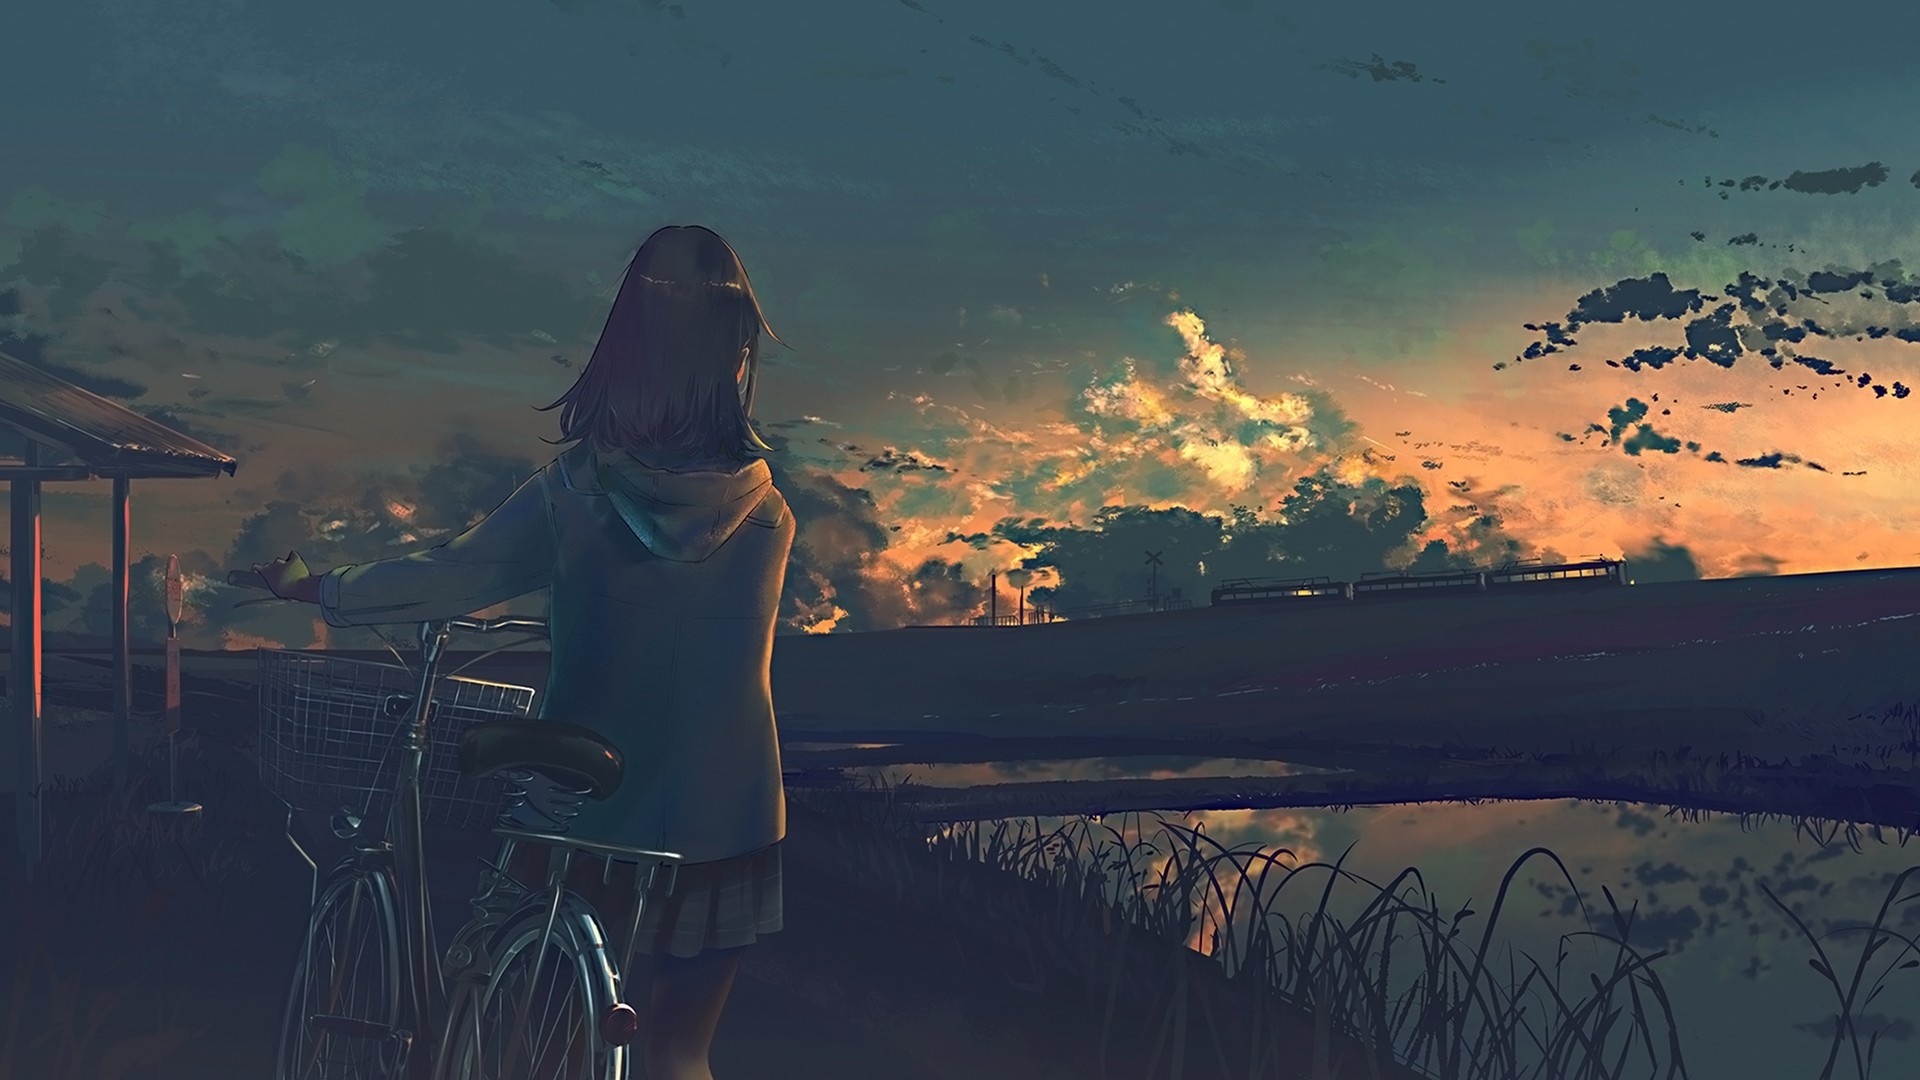 Desktop Wallpaper With Bicycle, Anime Girl, Sunset, Original, Hd Image,  Picture, Background, 7e13c6